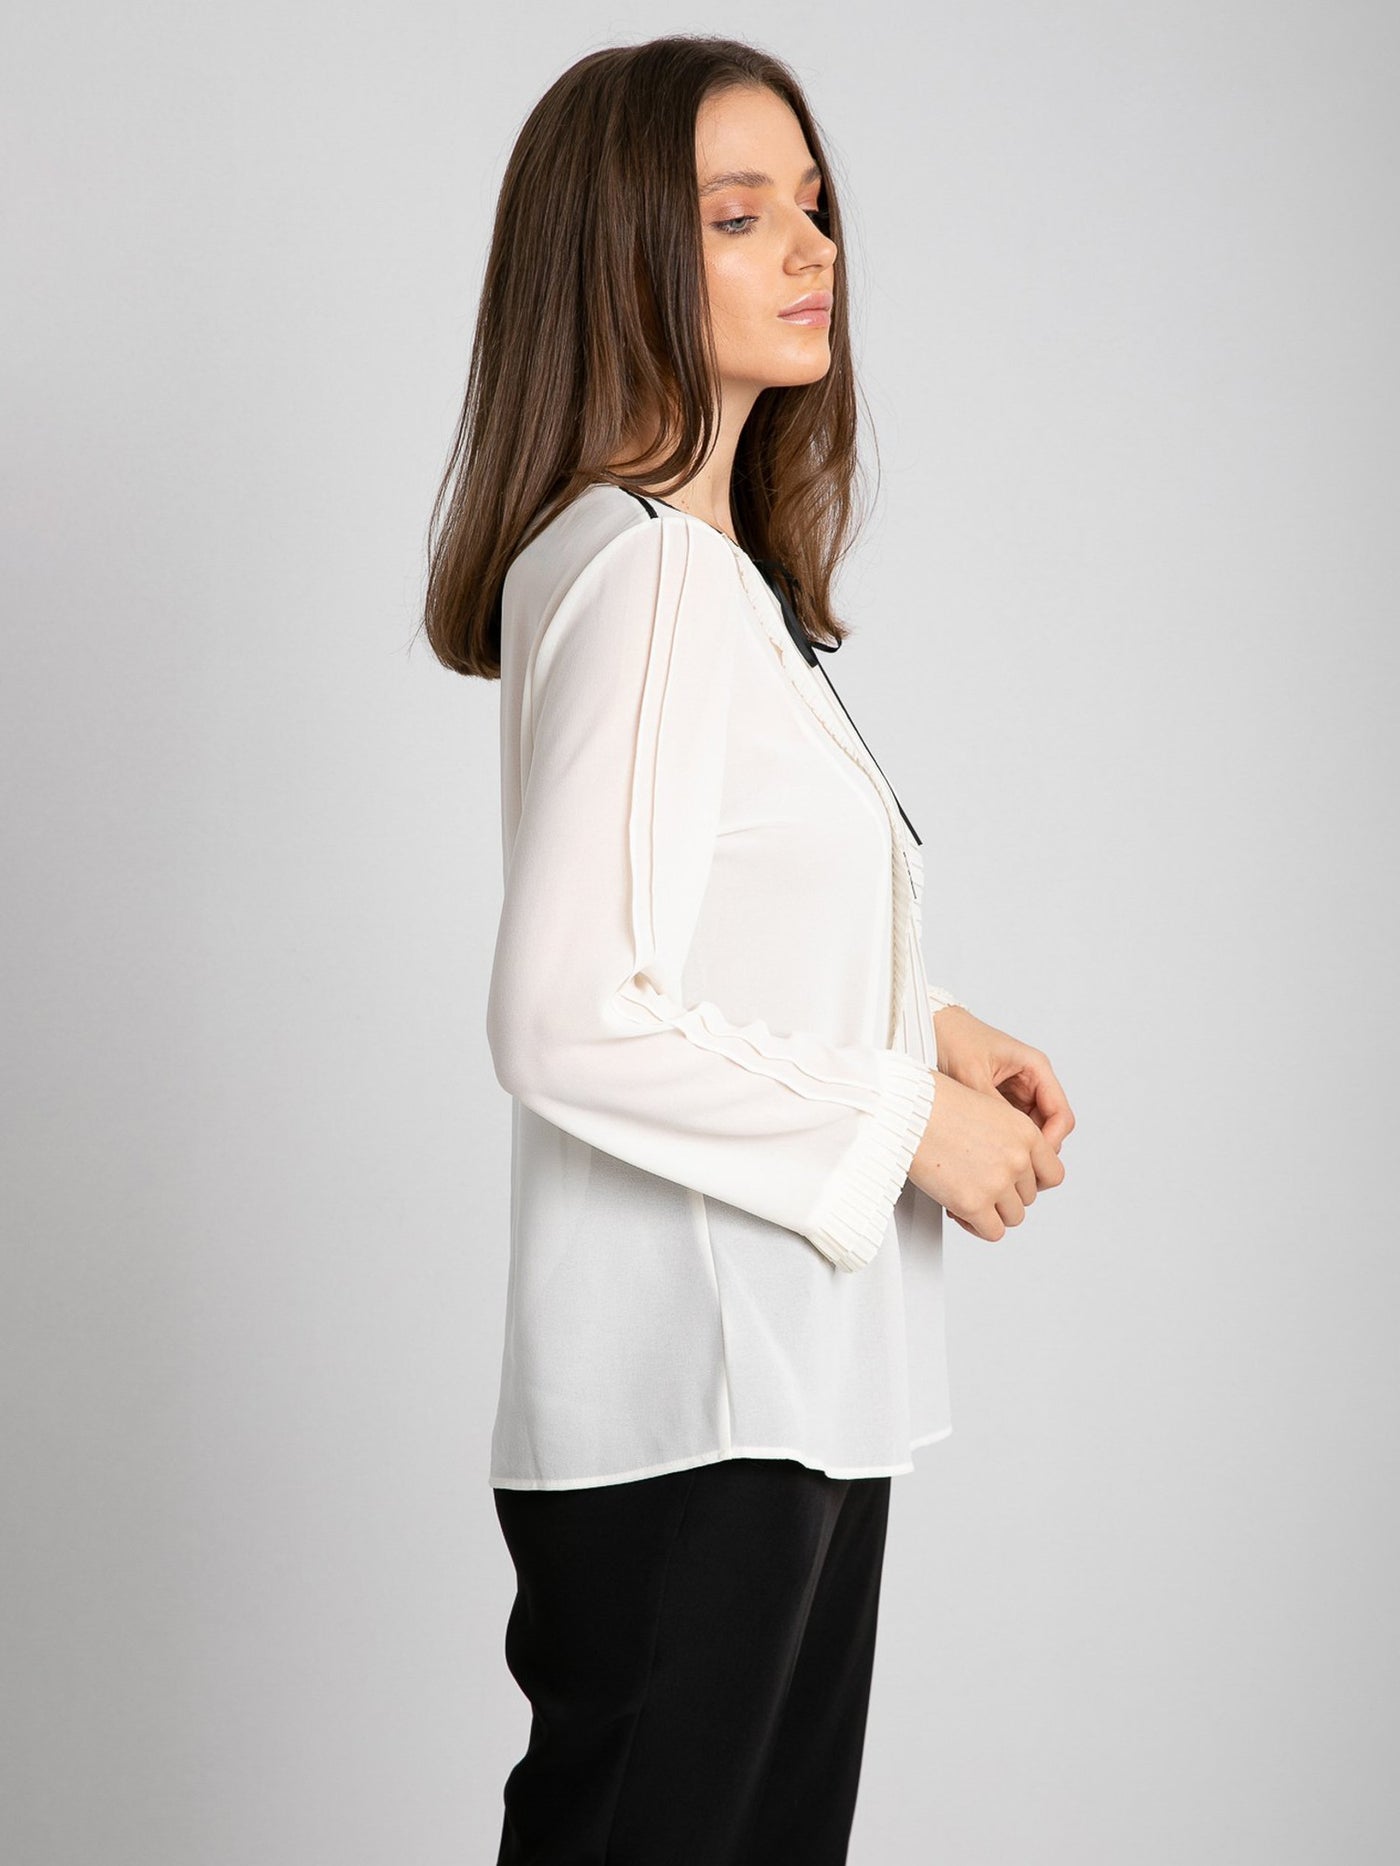 Blouse - Pleated Detail - Long Sleeves